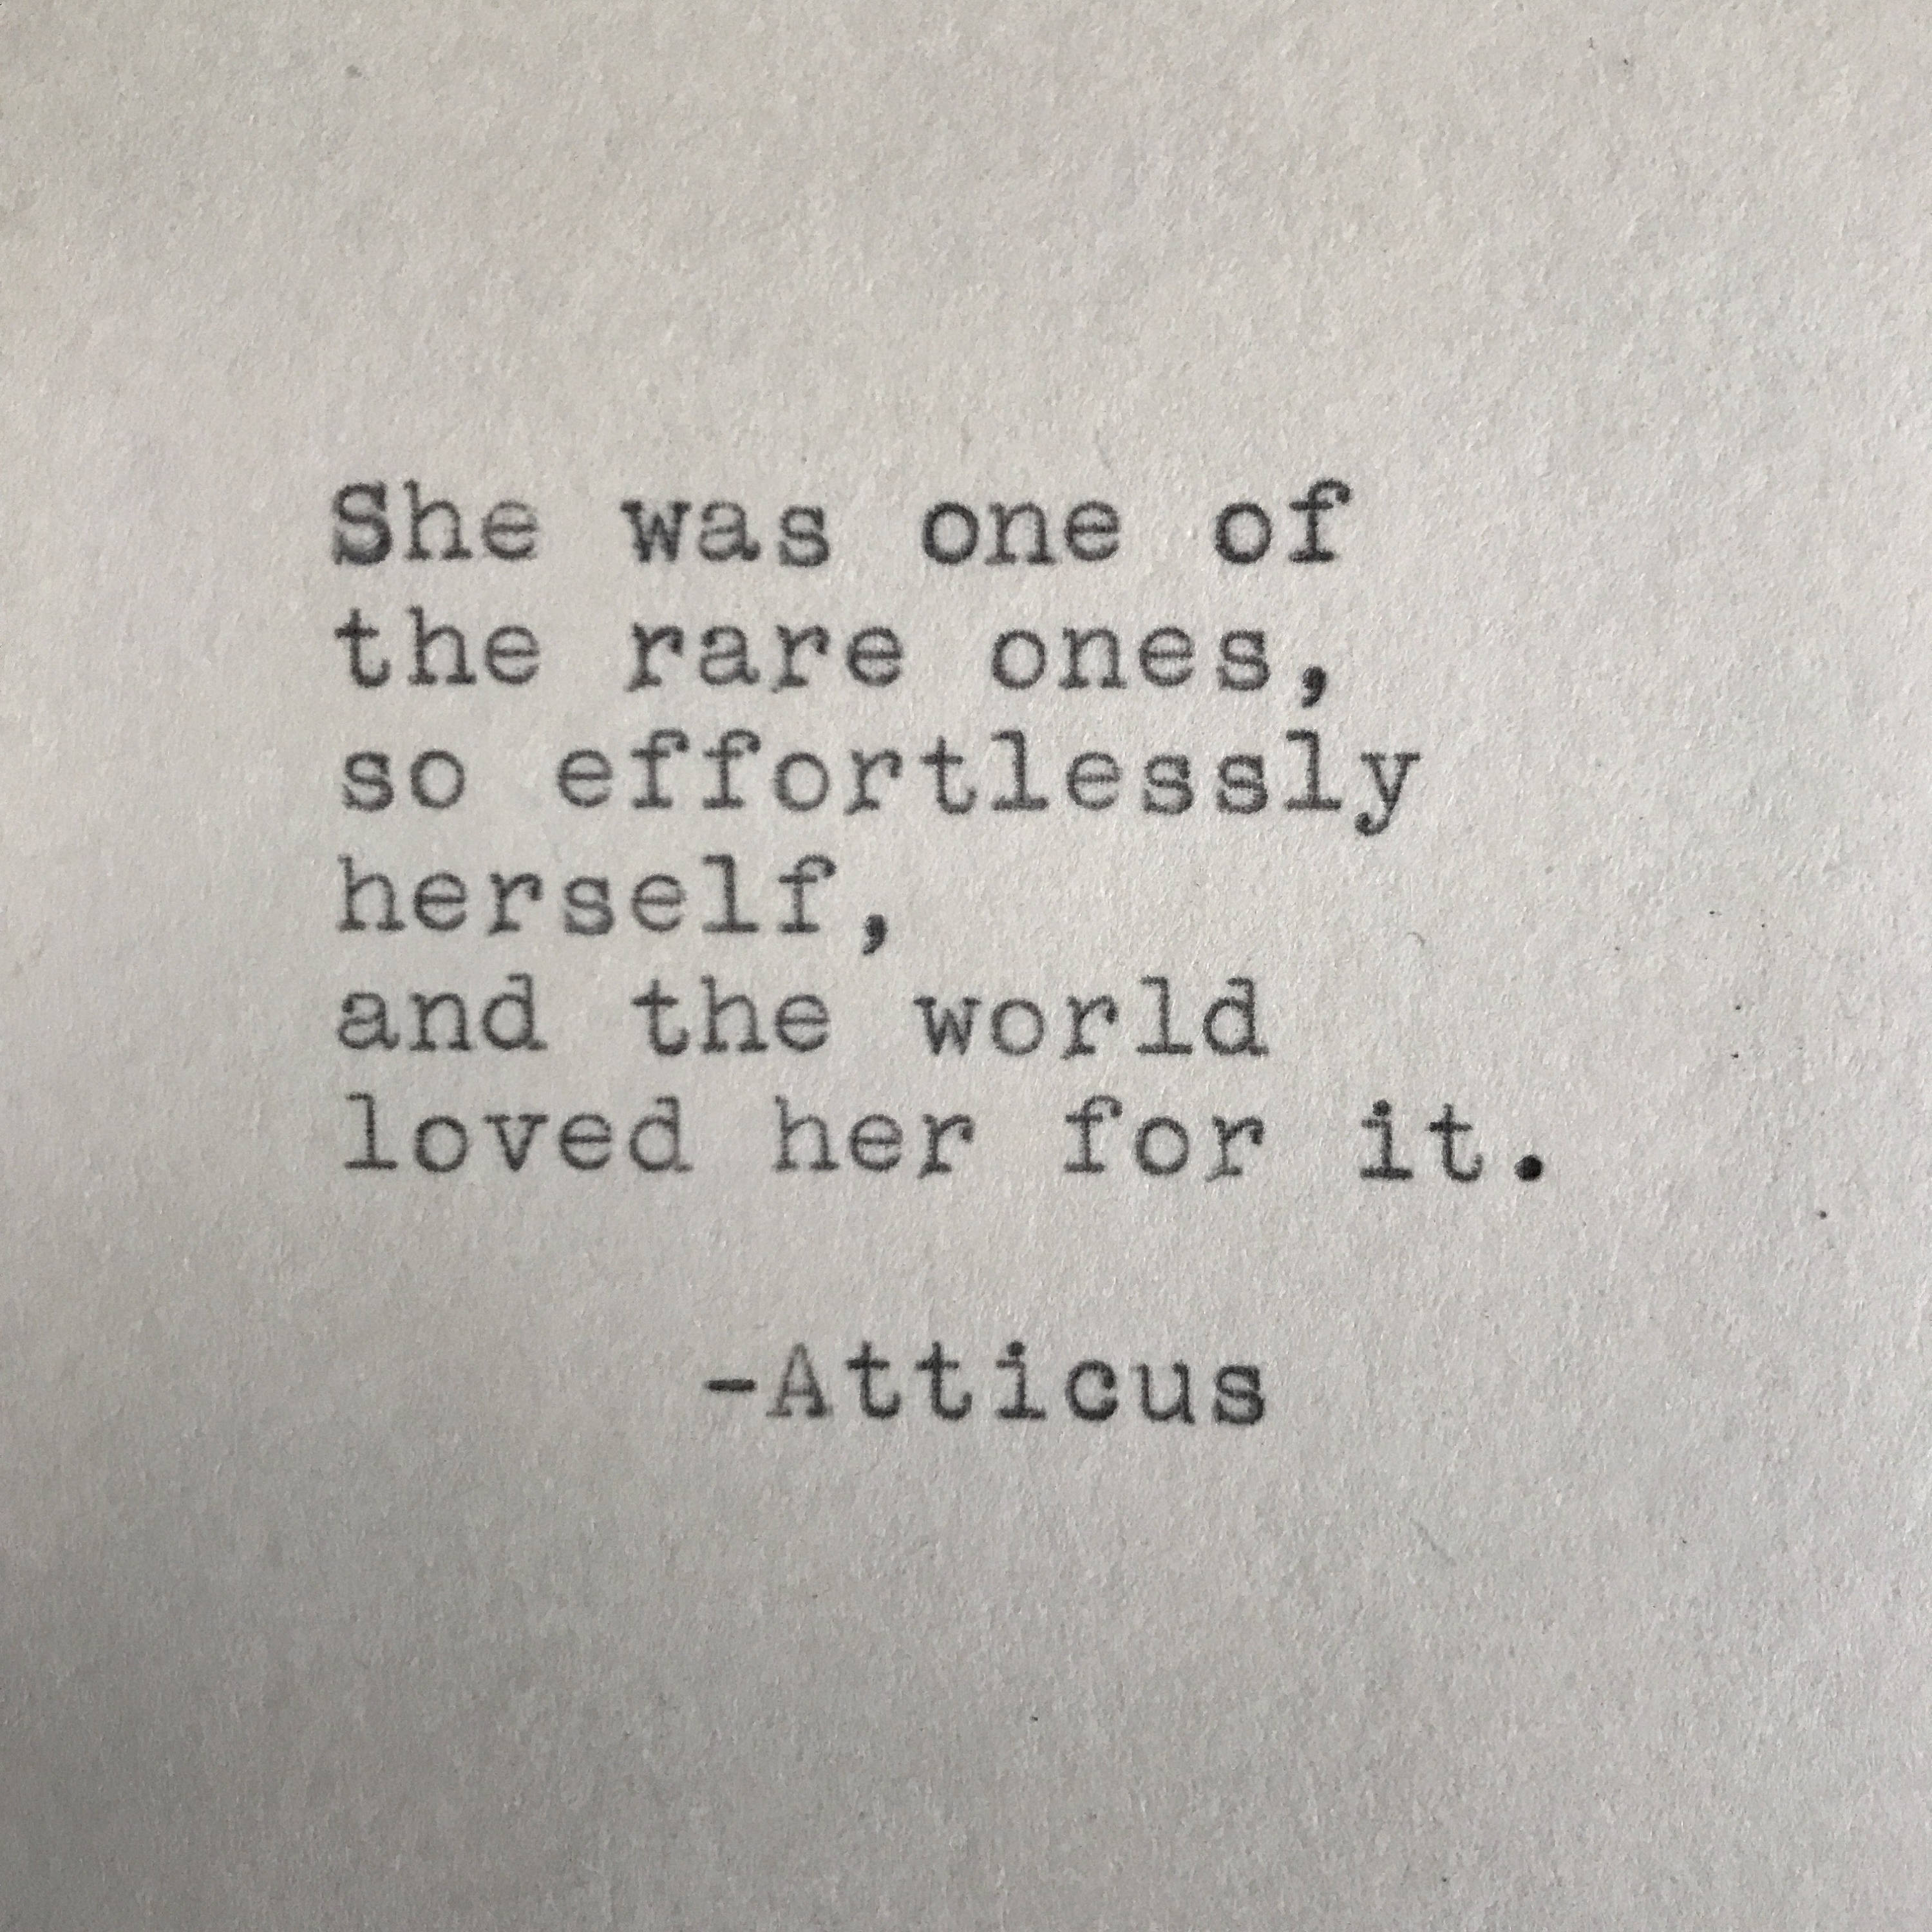 Atticus Love Quote Typed on Typewriter 4x6 White Cardstock